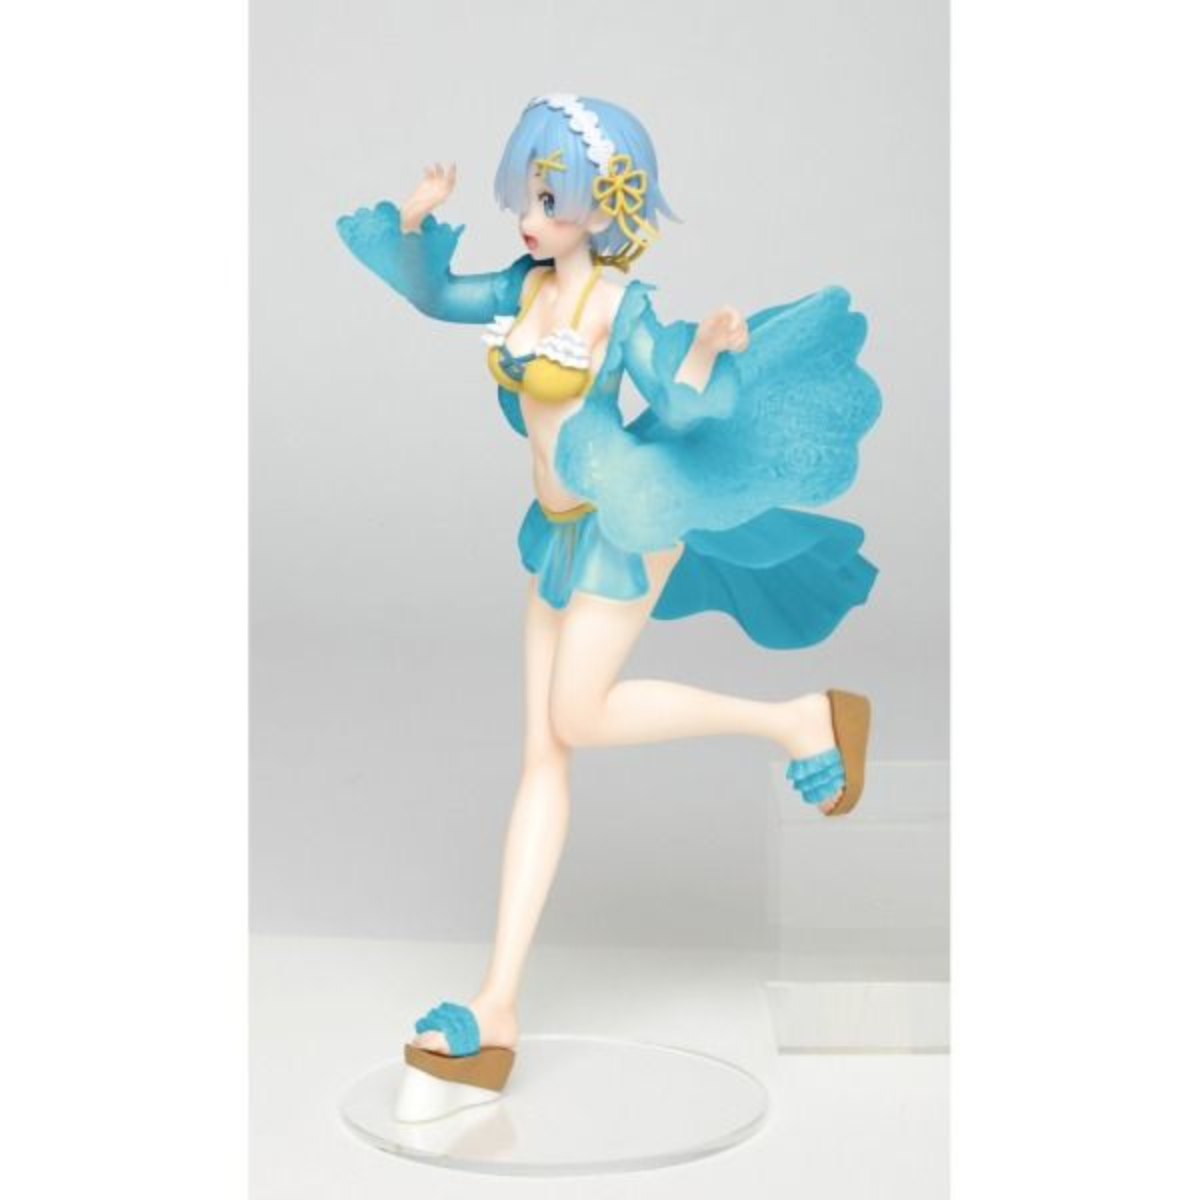 Re: Zero Starting Life in Another World Precious Figure "Rem" (Original Frill Swimwear Ver.) Renewal Edition-Taito-Ace Cards & Collectibles